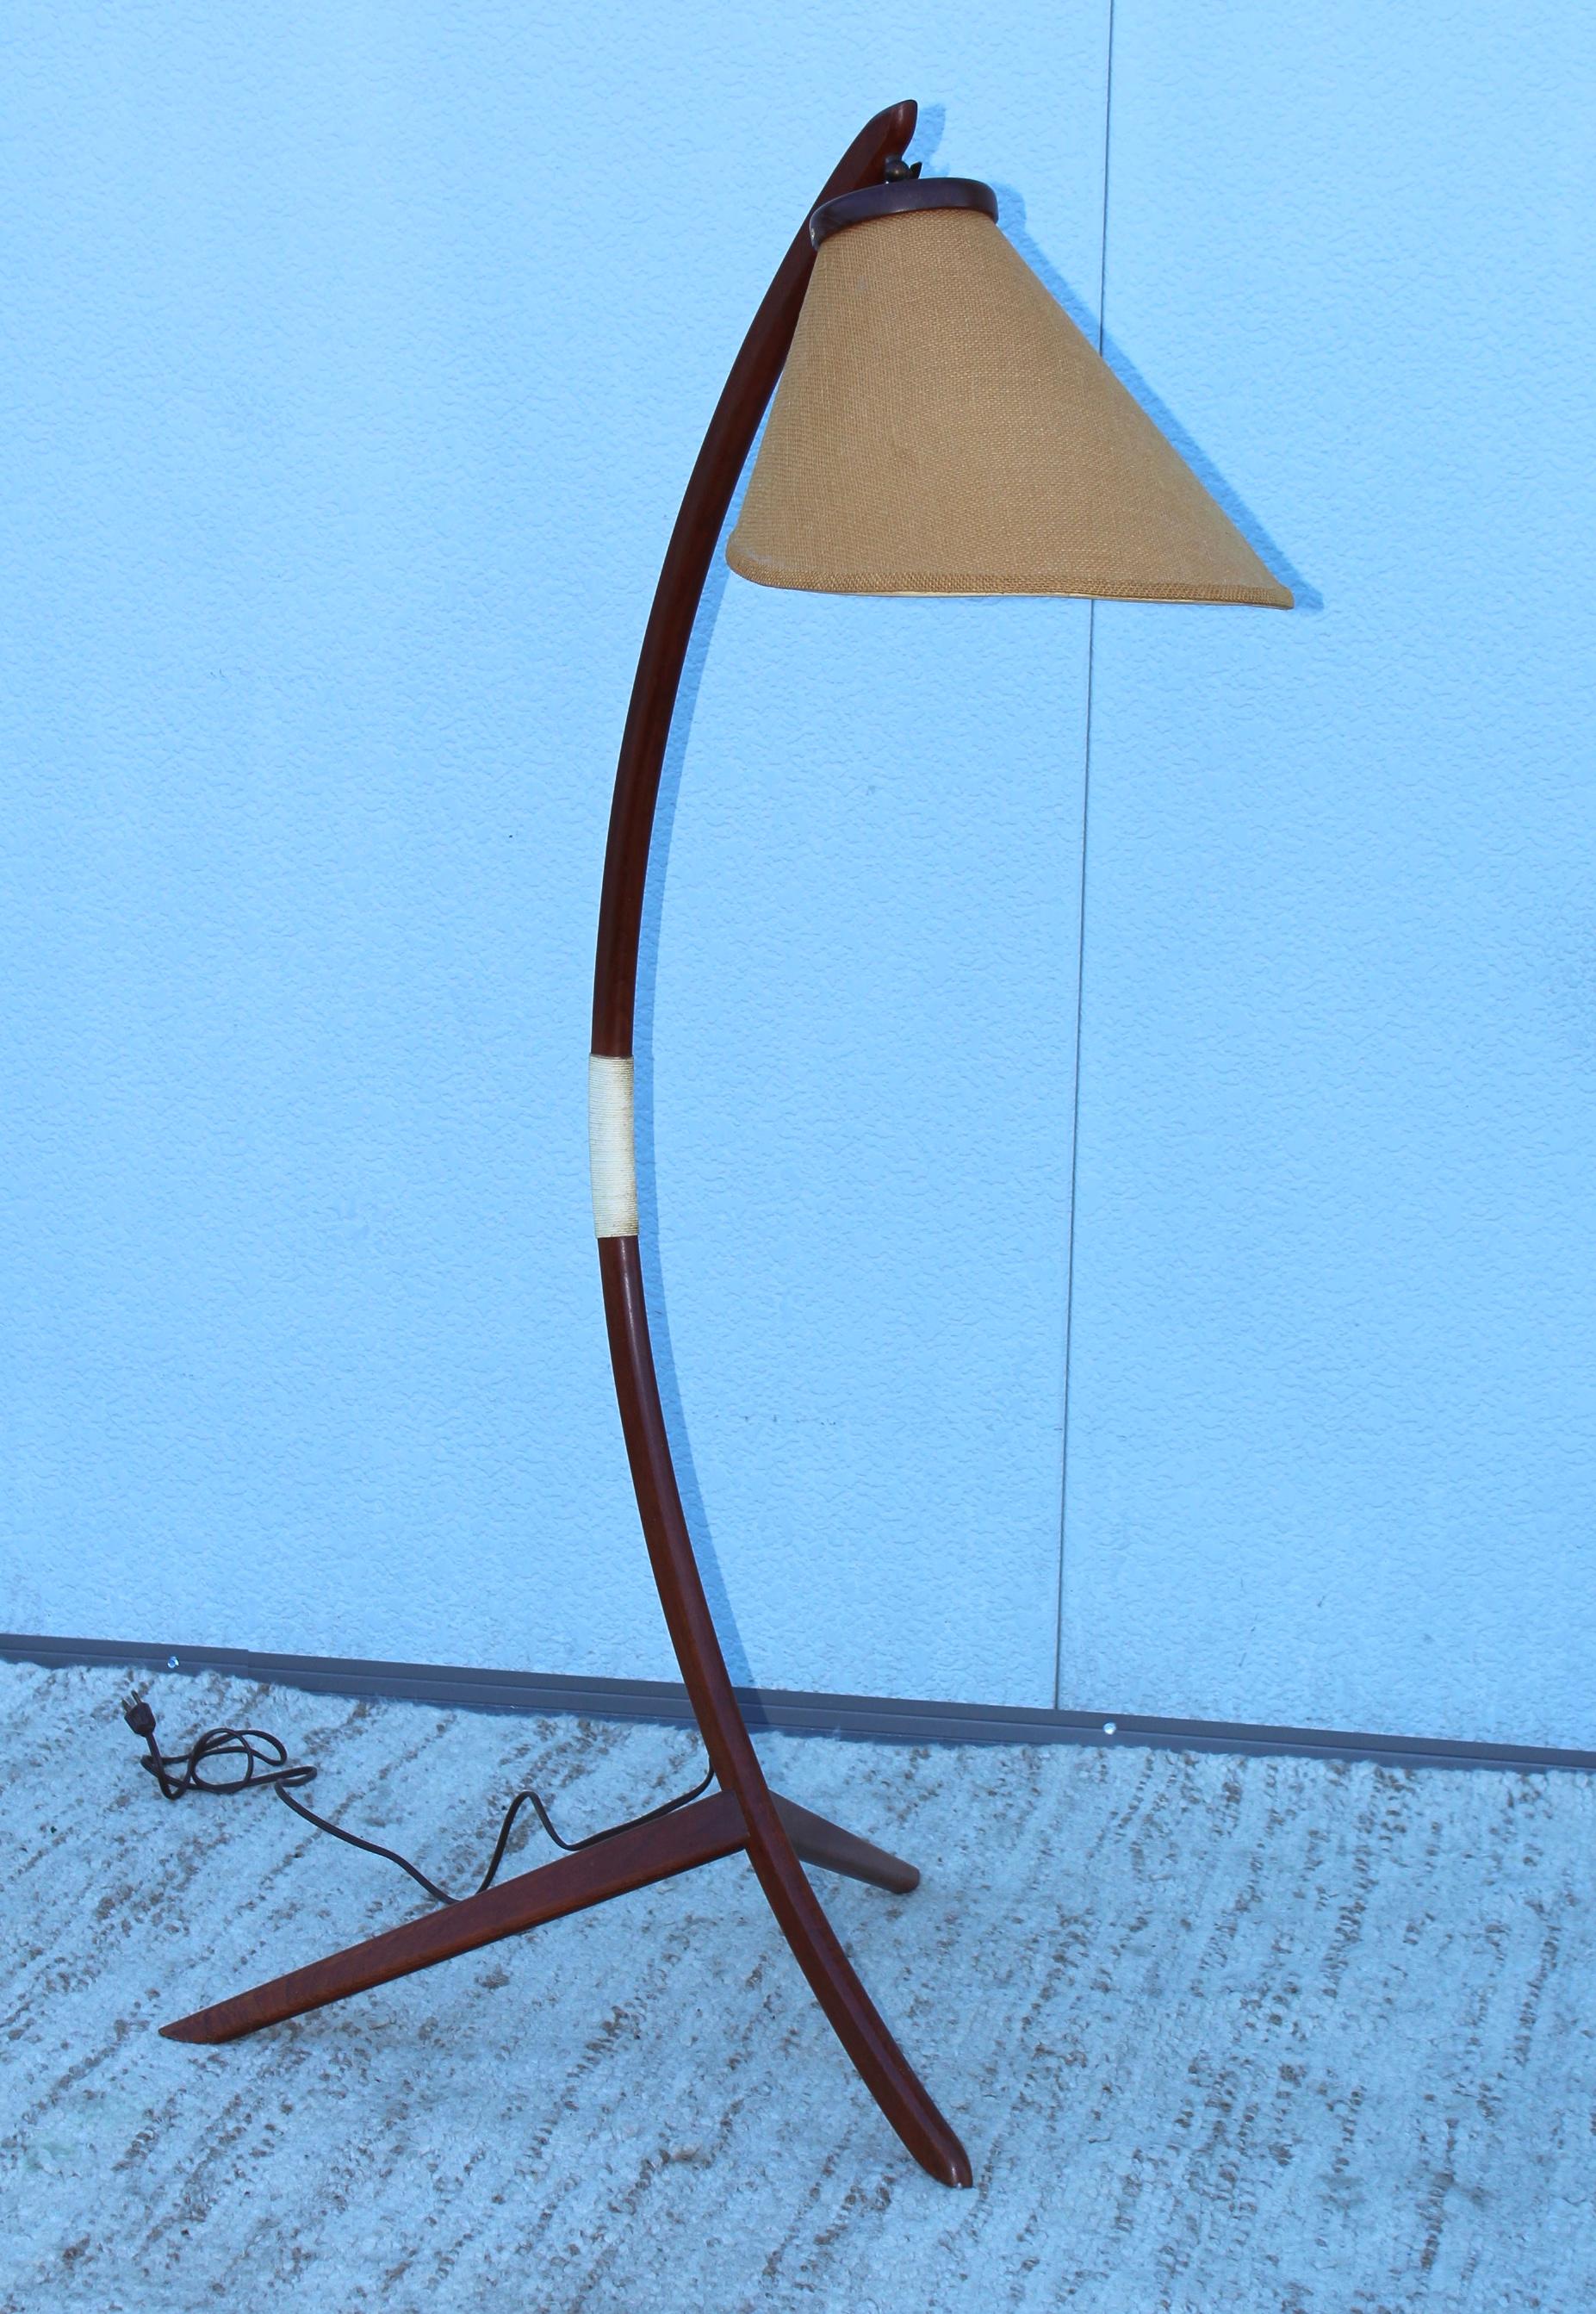 Stunning 1960's Mid-Century Modern Danish teak tripod floor lamp, in vintage original condition with original shade, there is some wear to shade and minor wear to the teak.